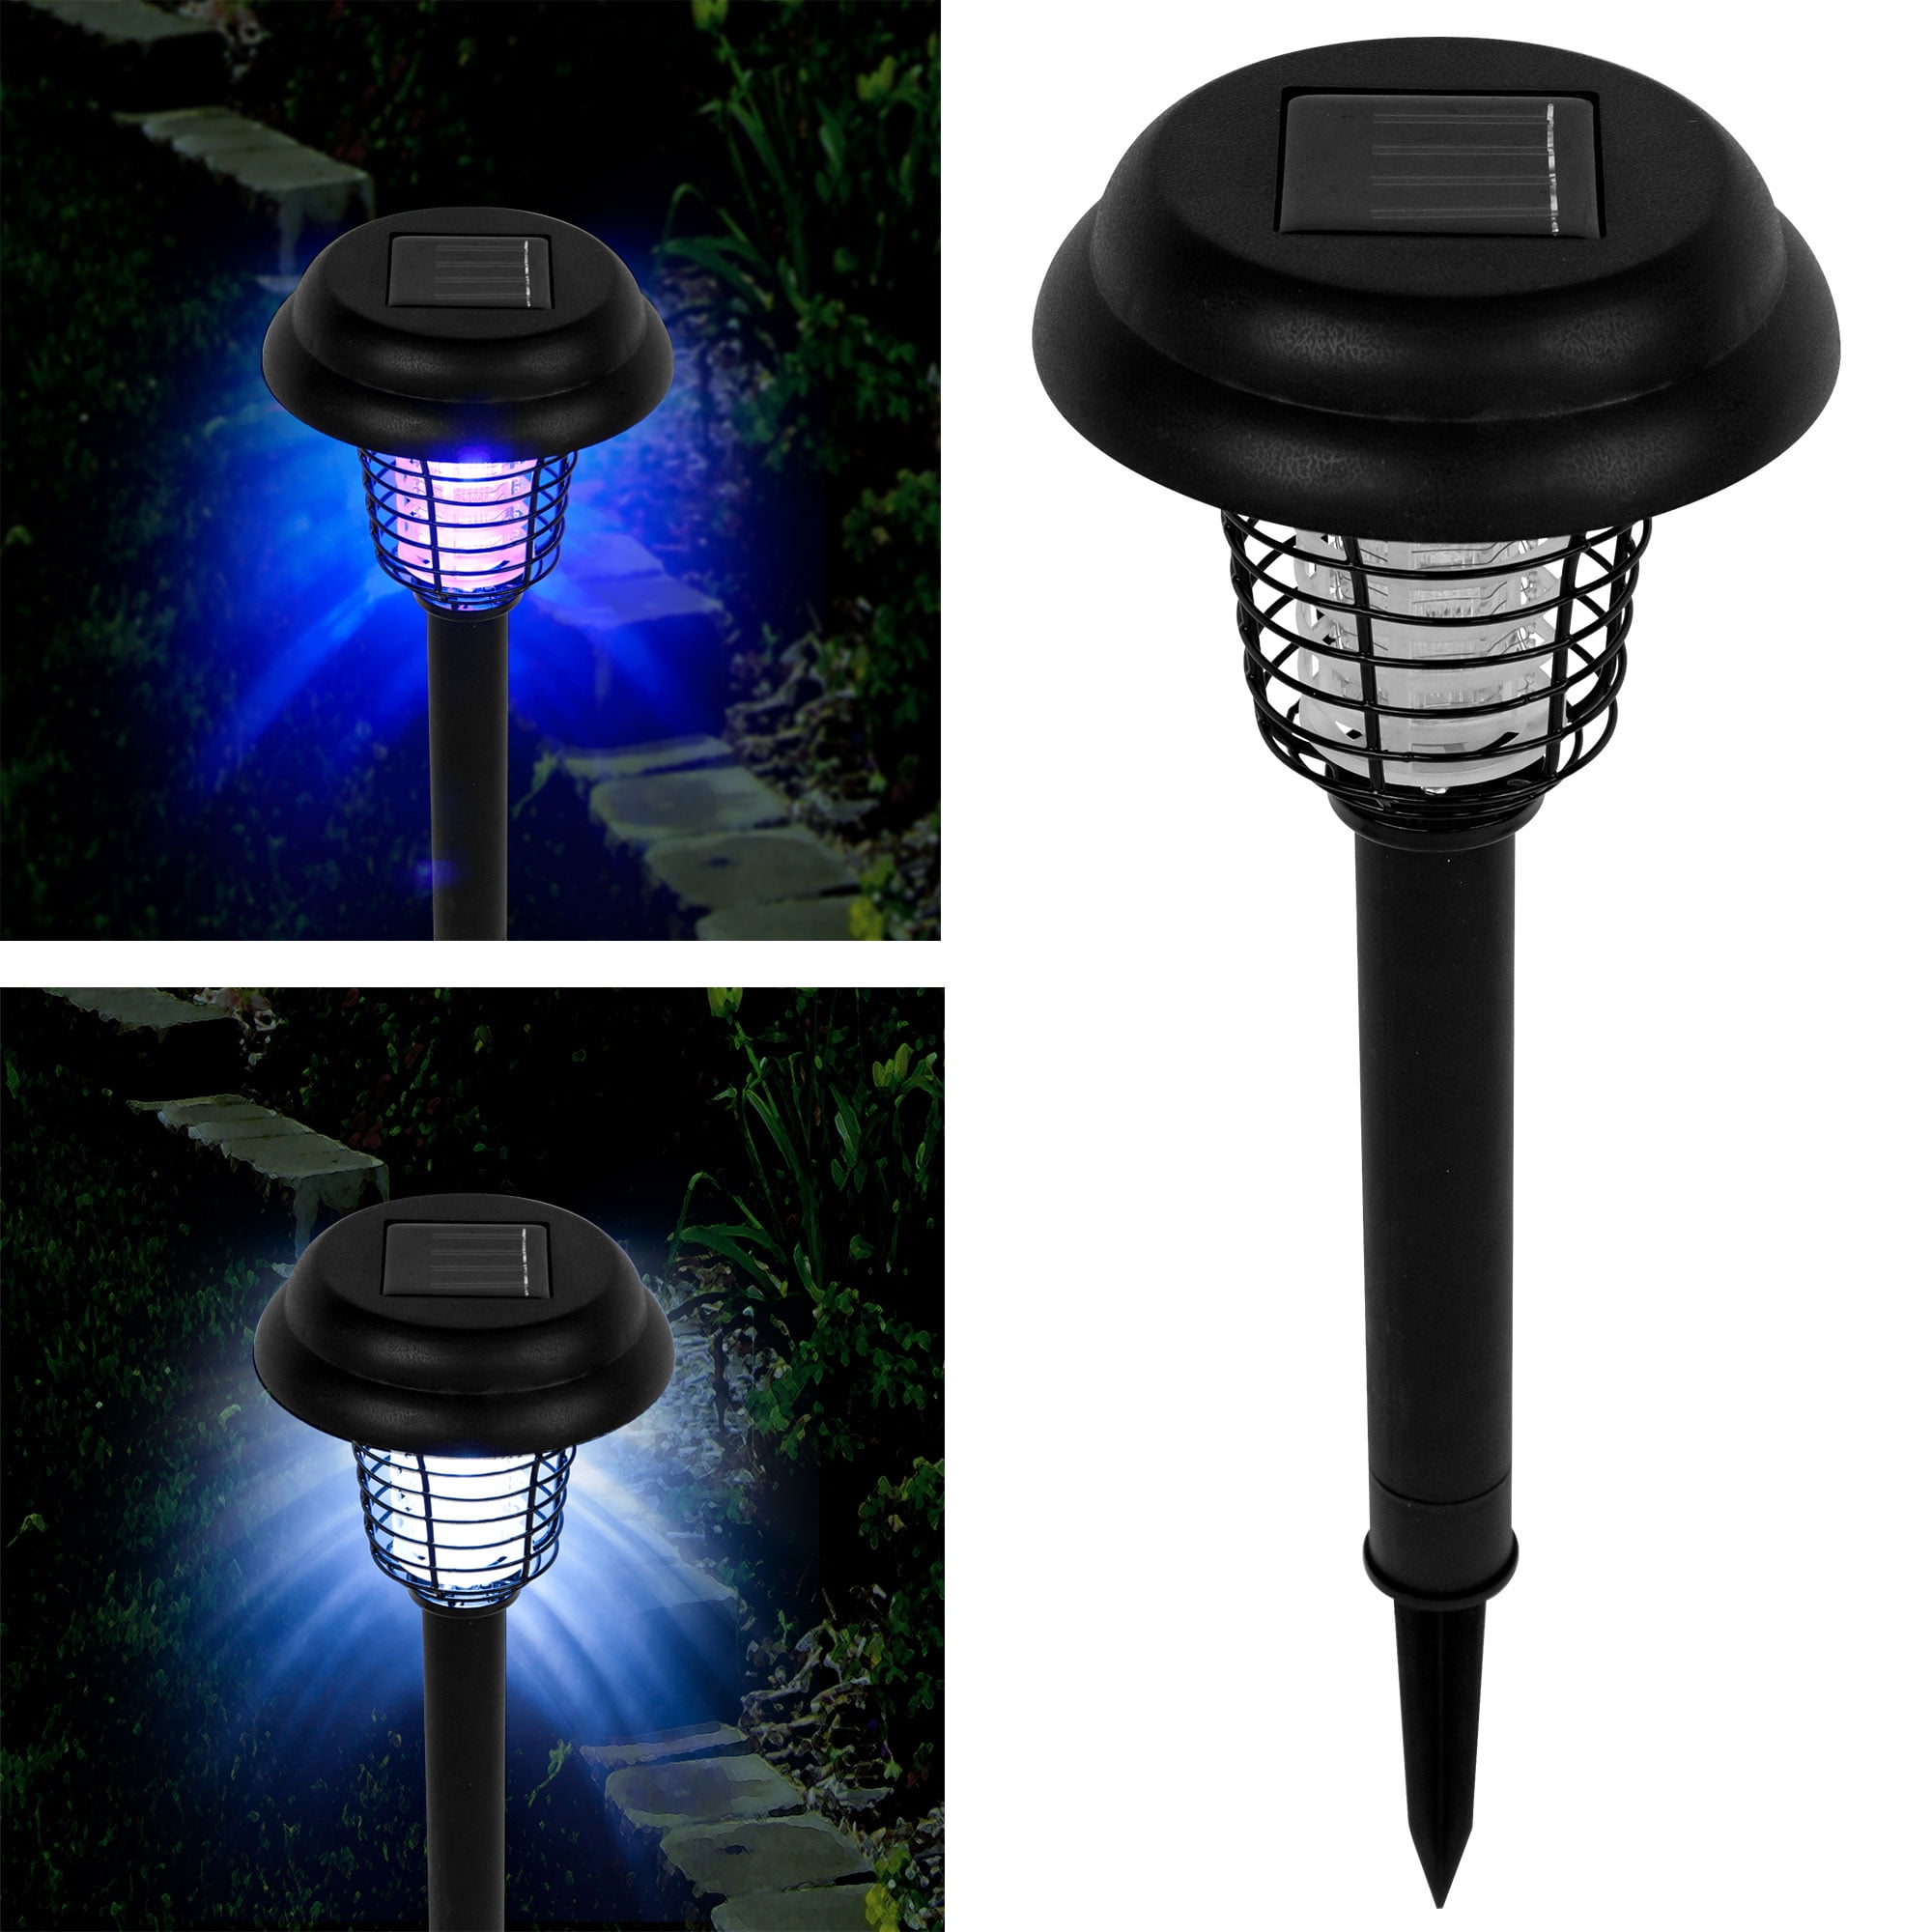 Outdoor LED Solar Mosquito Killer Lamps Portable Insect Bug Trap Zapper UV Light 